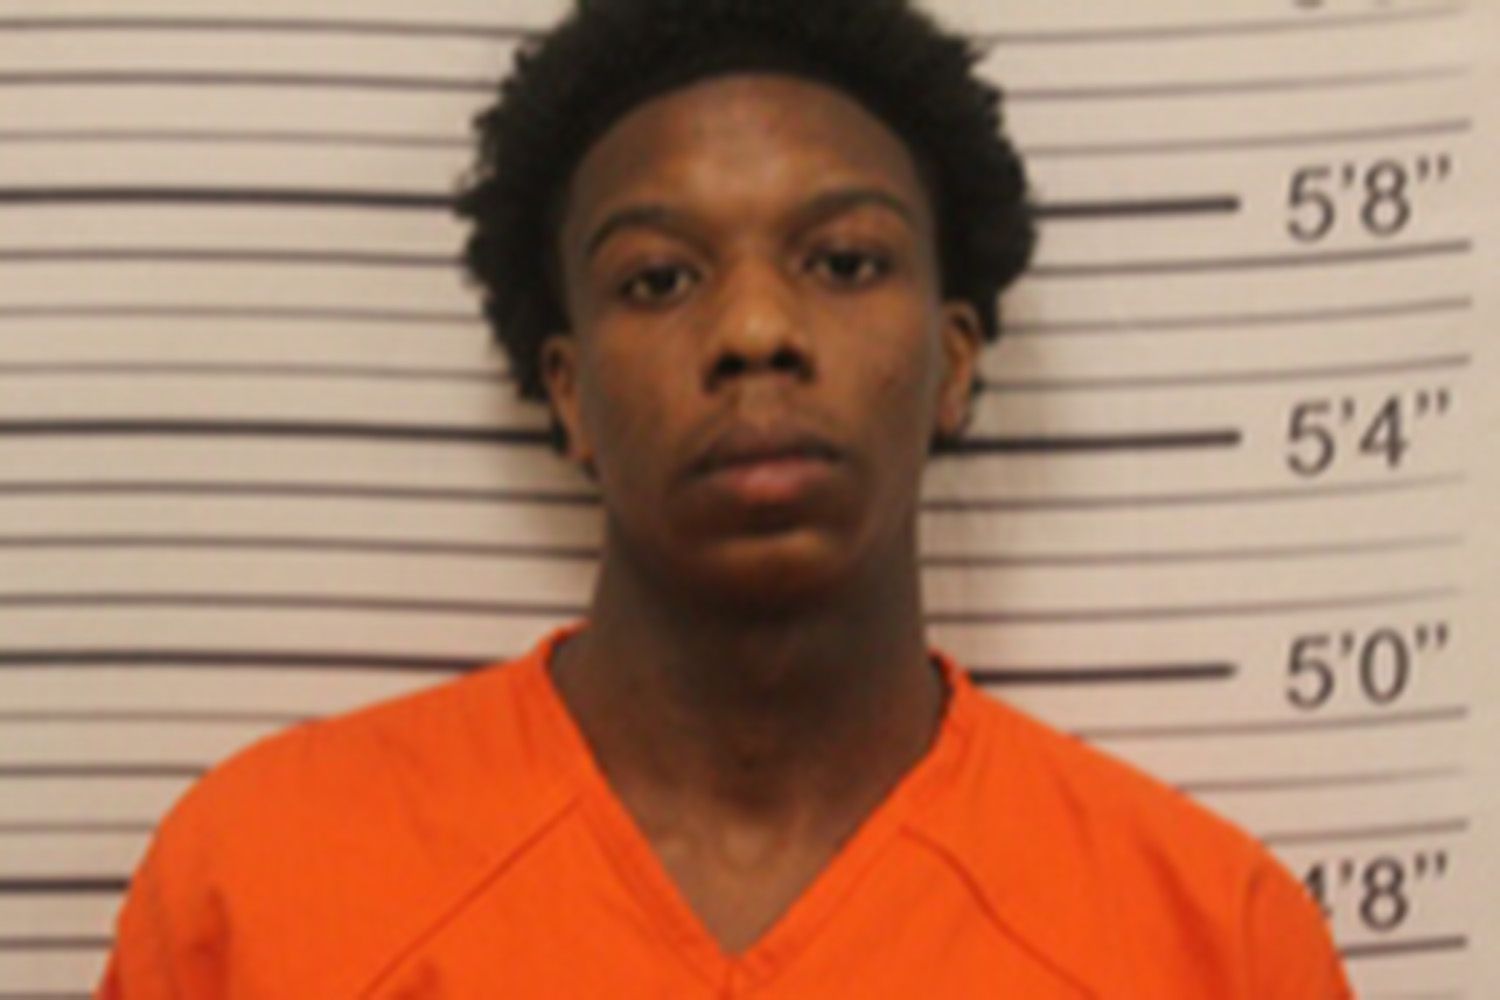 Donterious Stephens, 19, of Helena, turned himself in to authorities Sunday afternoon in the shooting death of Lorenzo Harrison III, 18